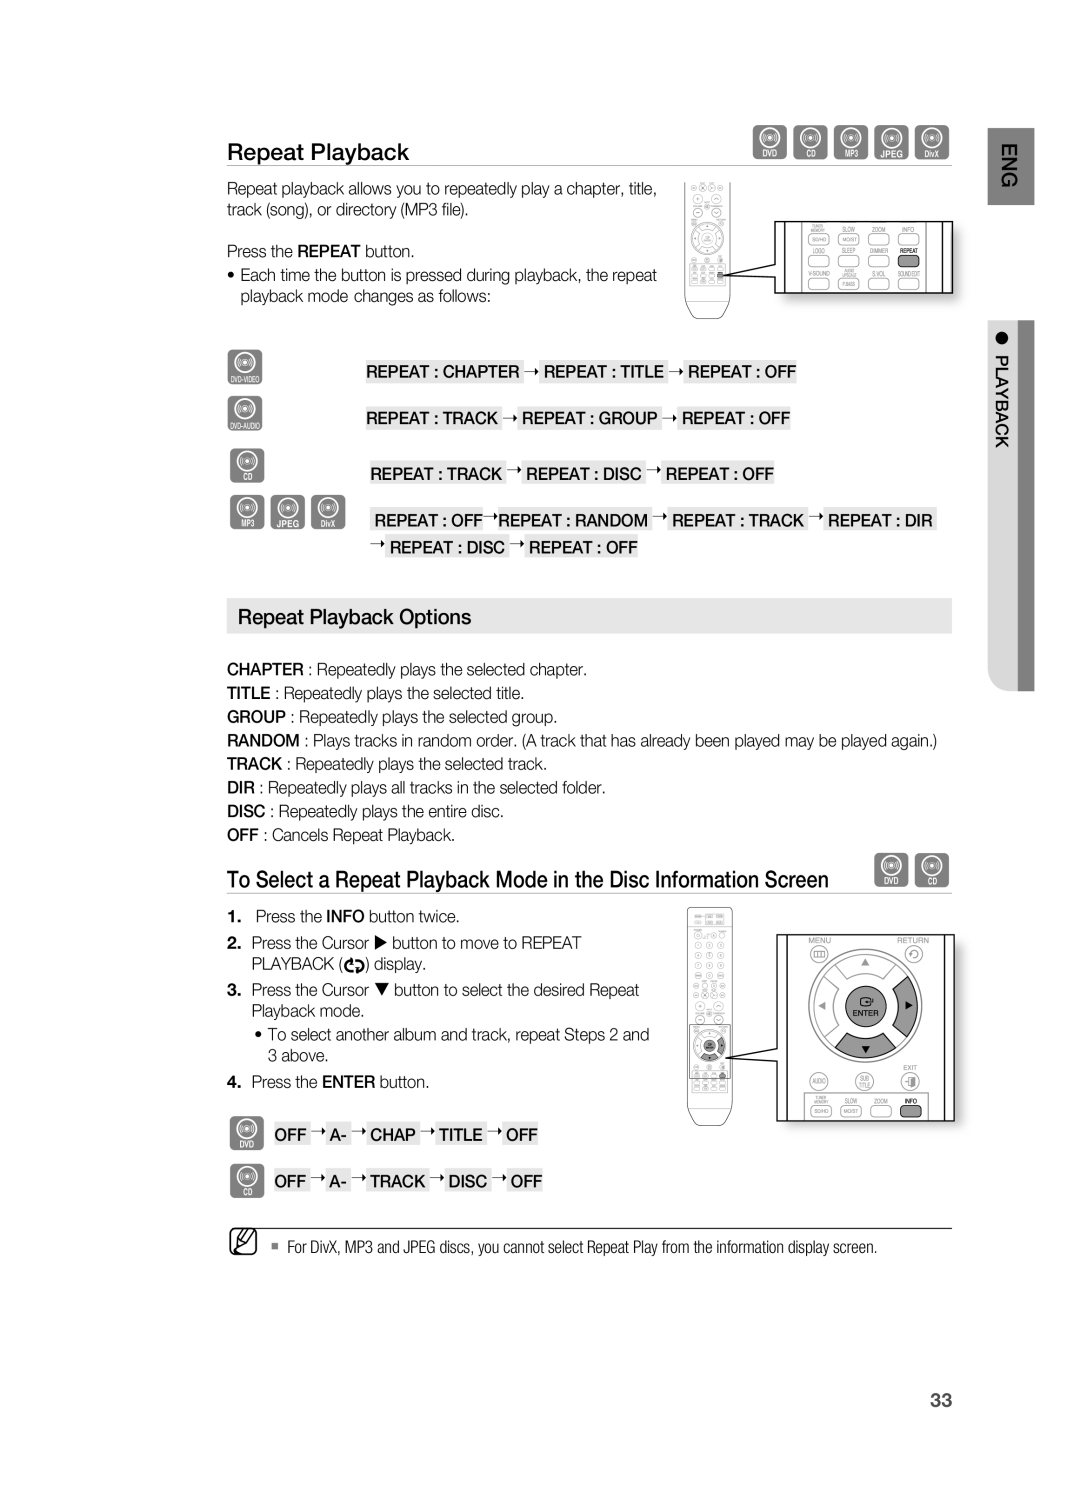 Sony HT-X810 user manual To Select a repeat Playback Mode in the Disc Information Screen, repeat Playback Options, Bagd 